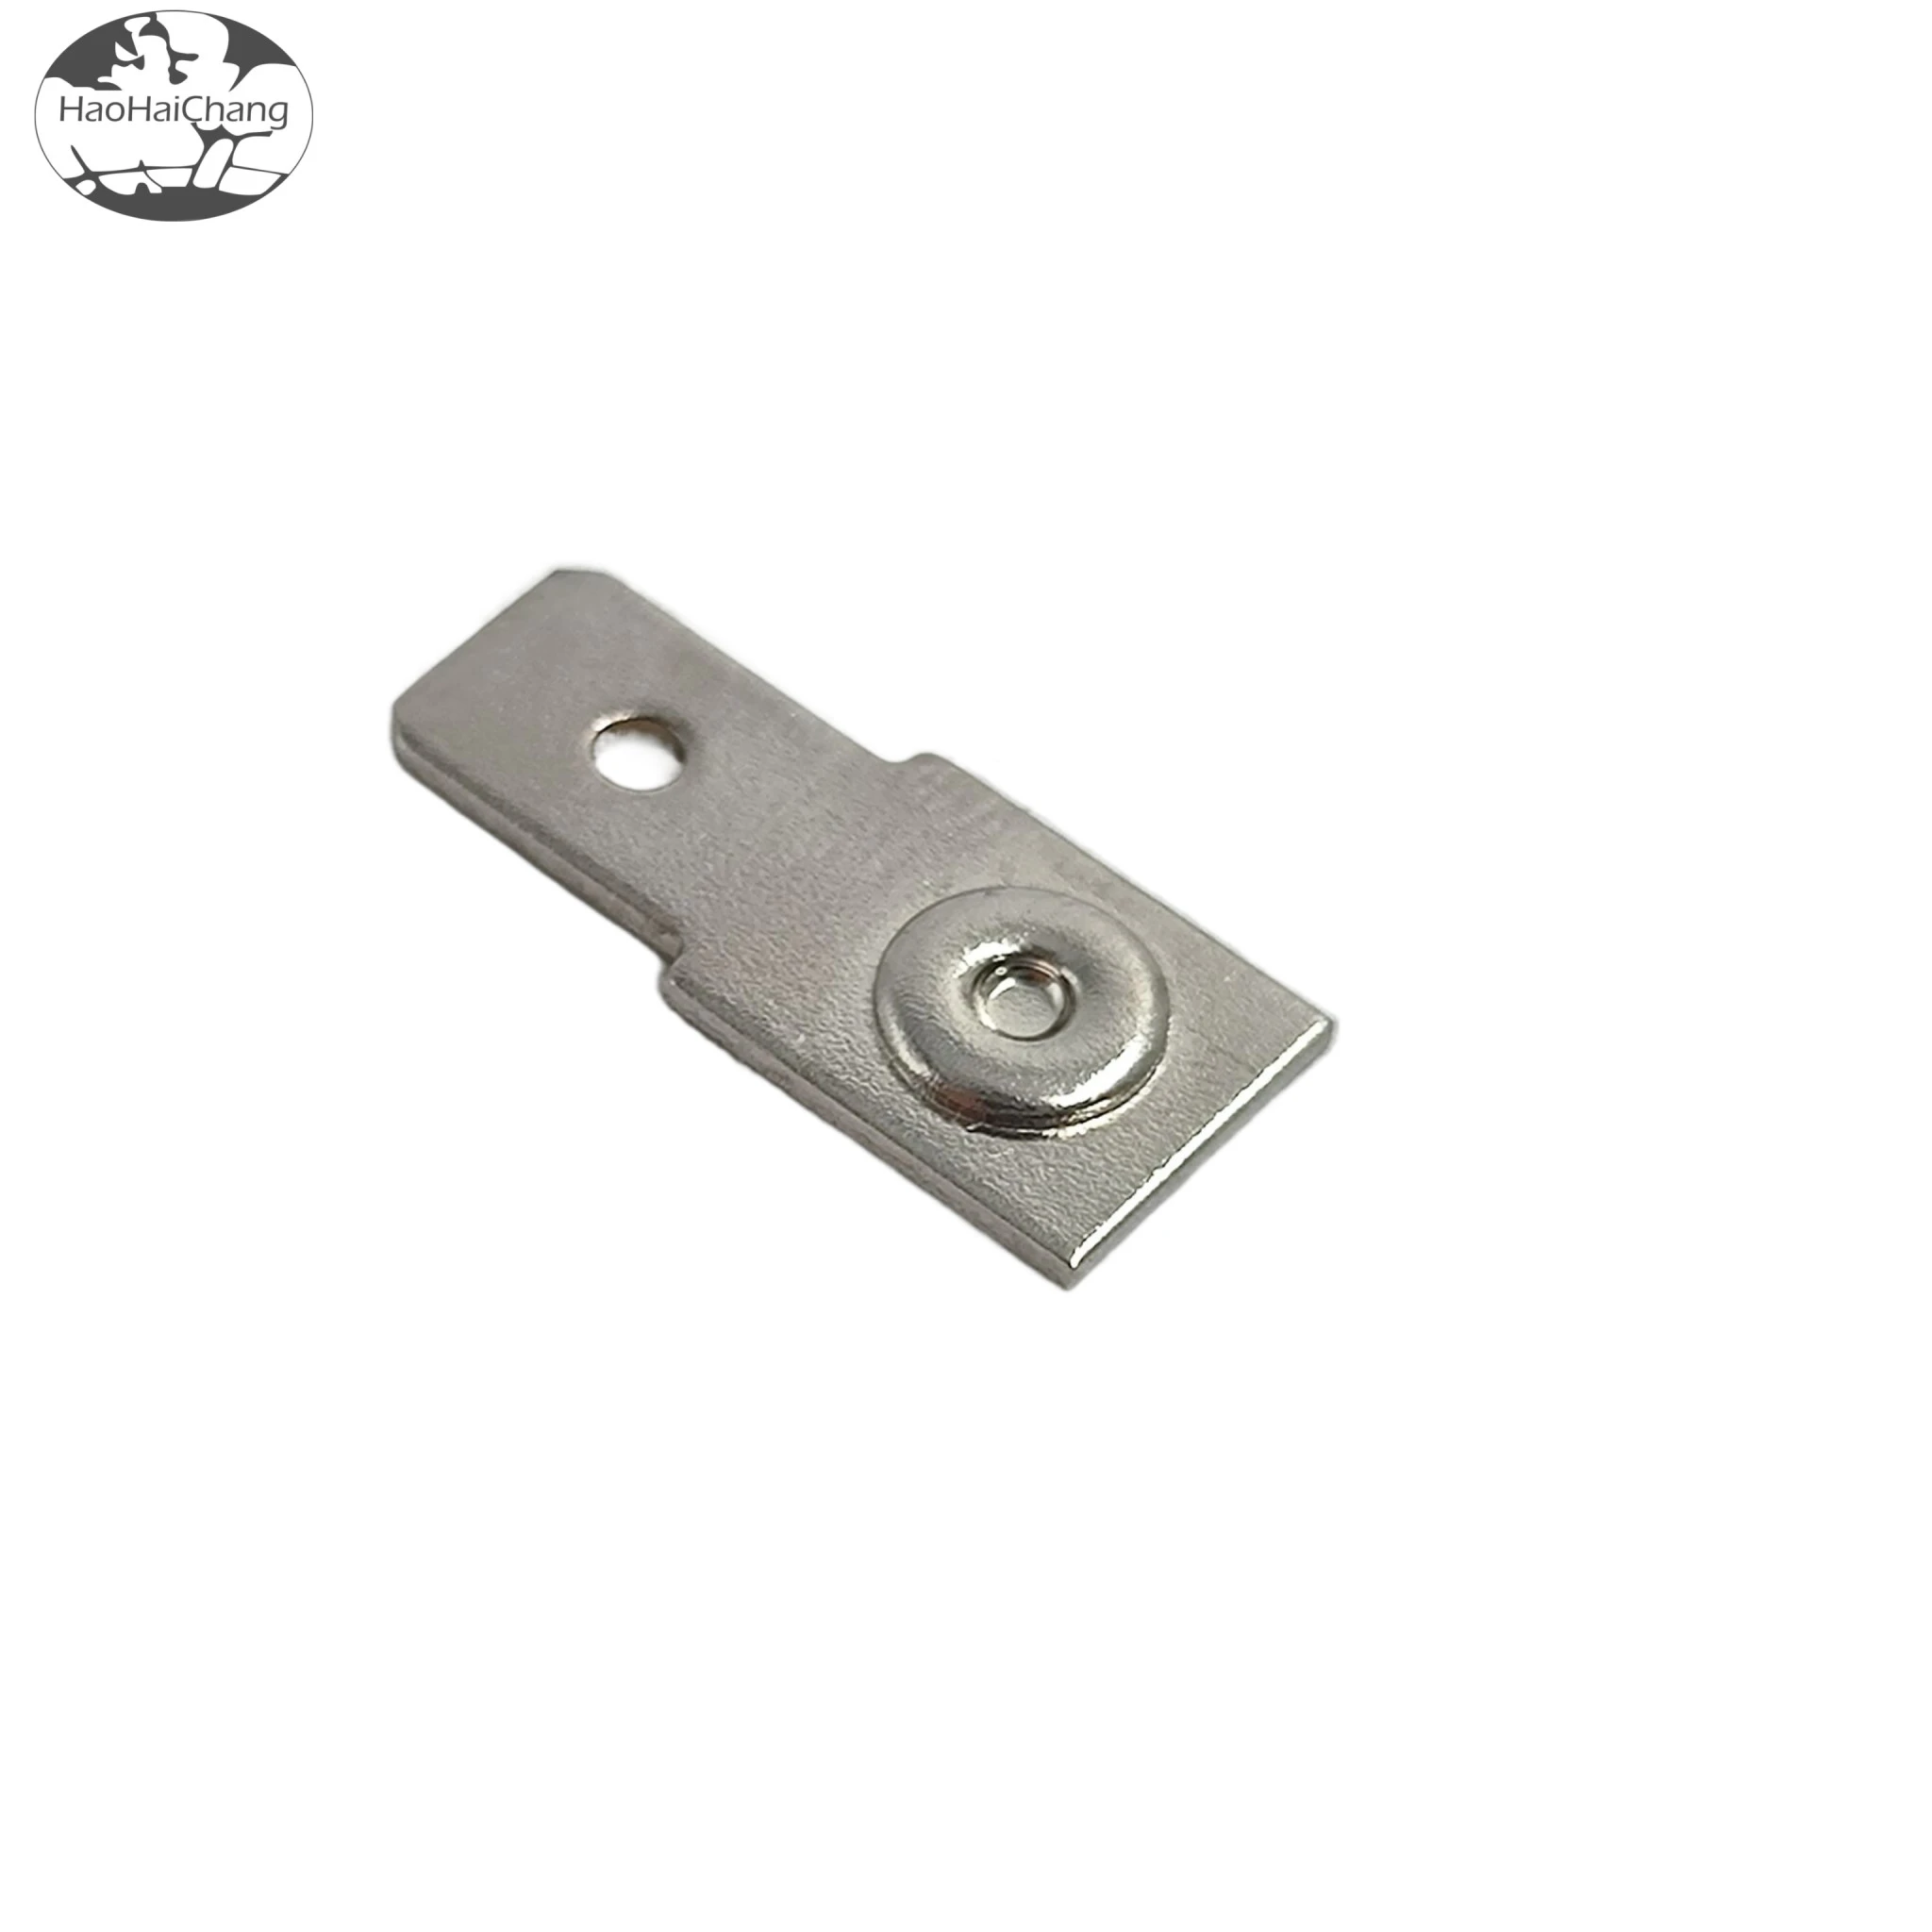 HHC-0137 Connector